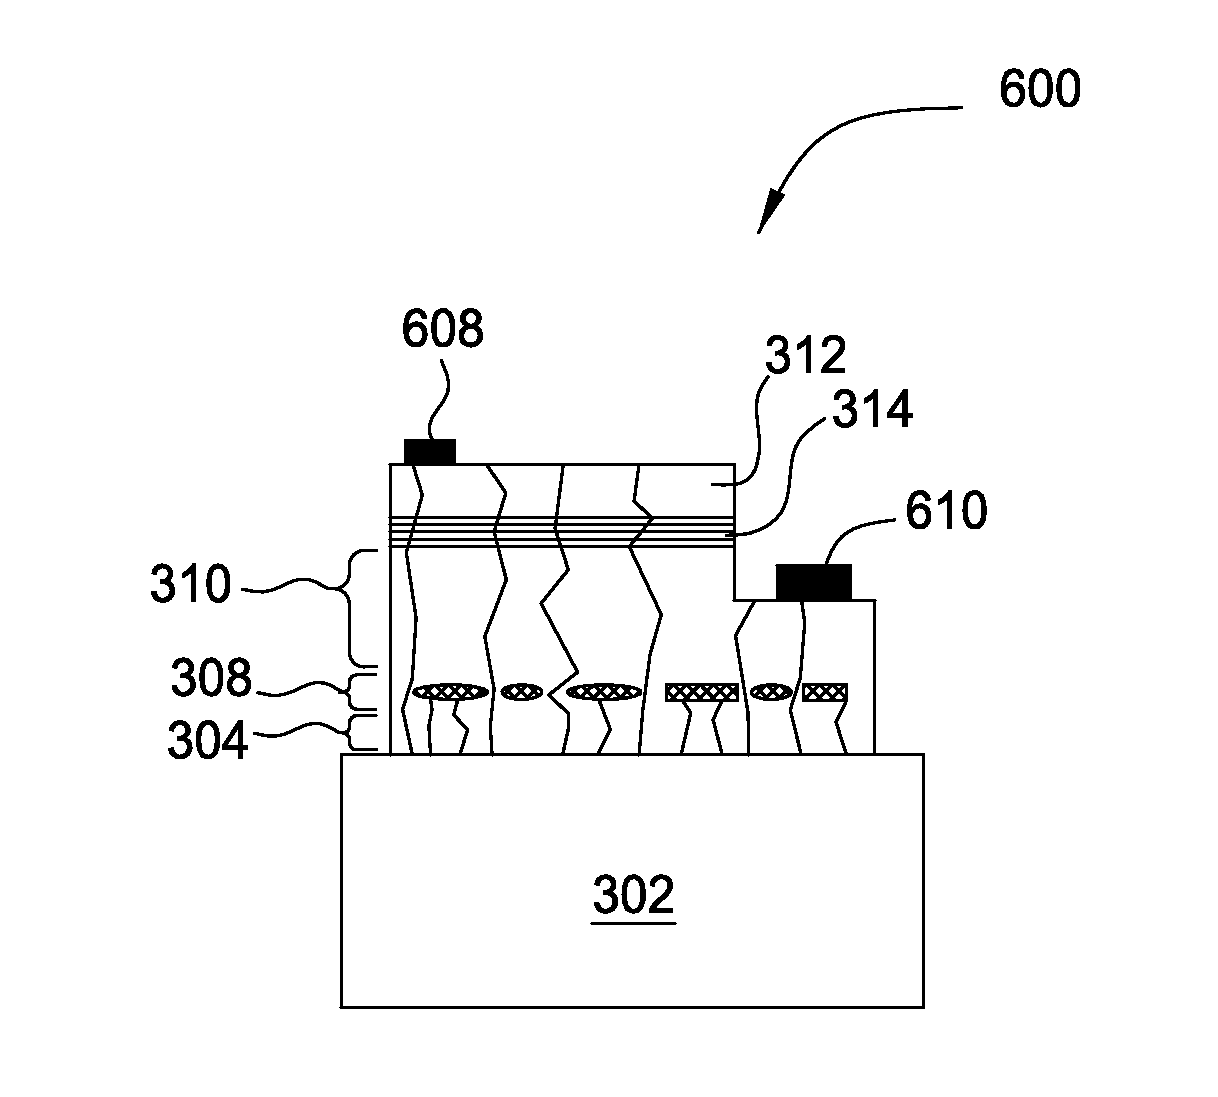 LIGHT-EMITTING DIODE DEVICE STRUCTURE WITH SixNy LAYER